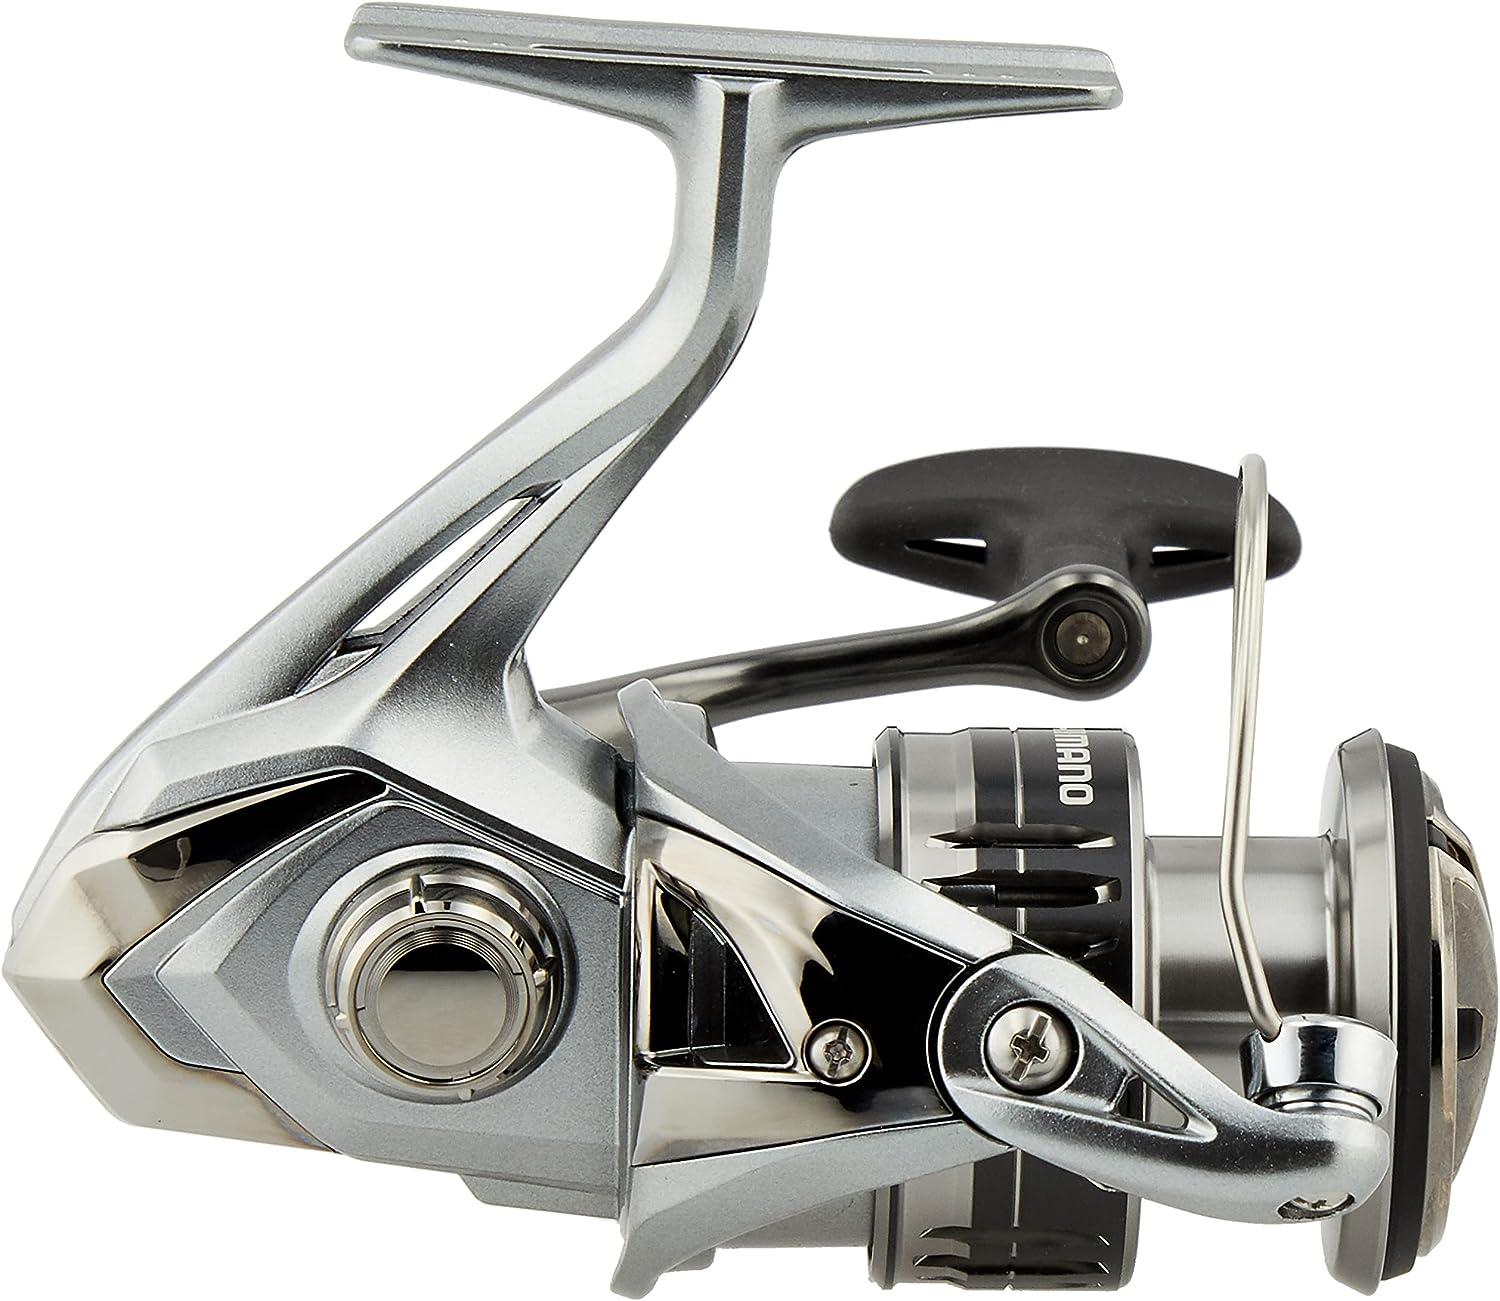 shimano reels japan, shimano reels japan Suppliers and Manufacturers at